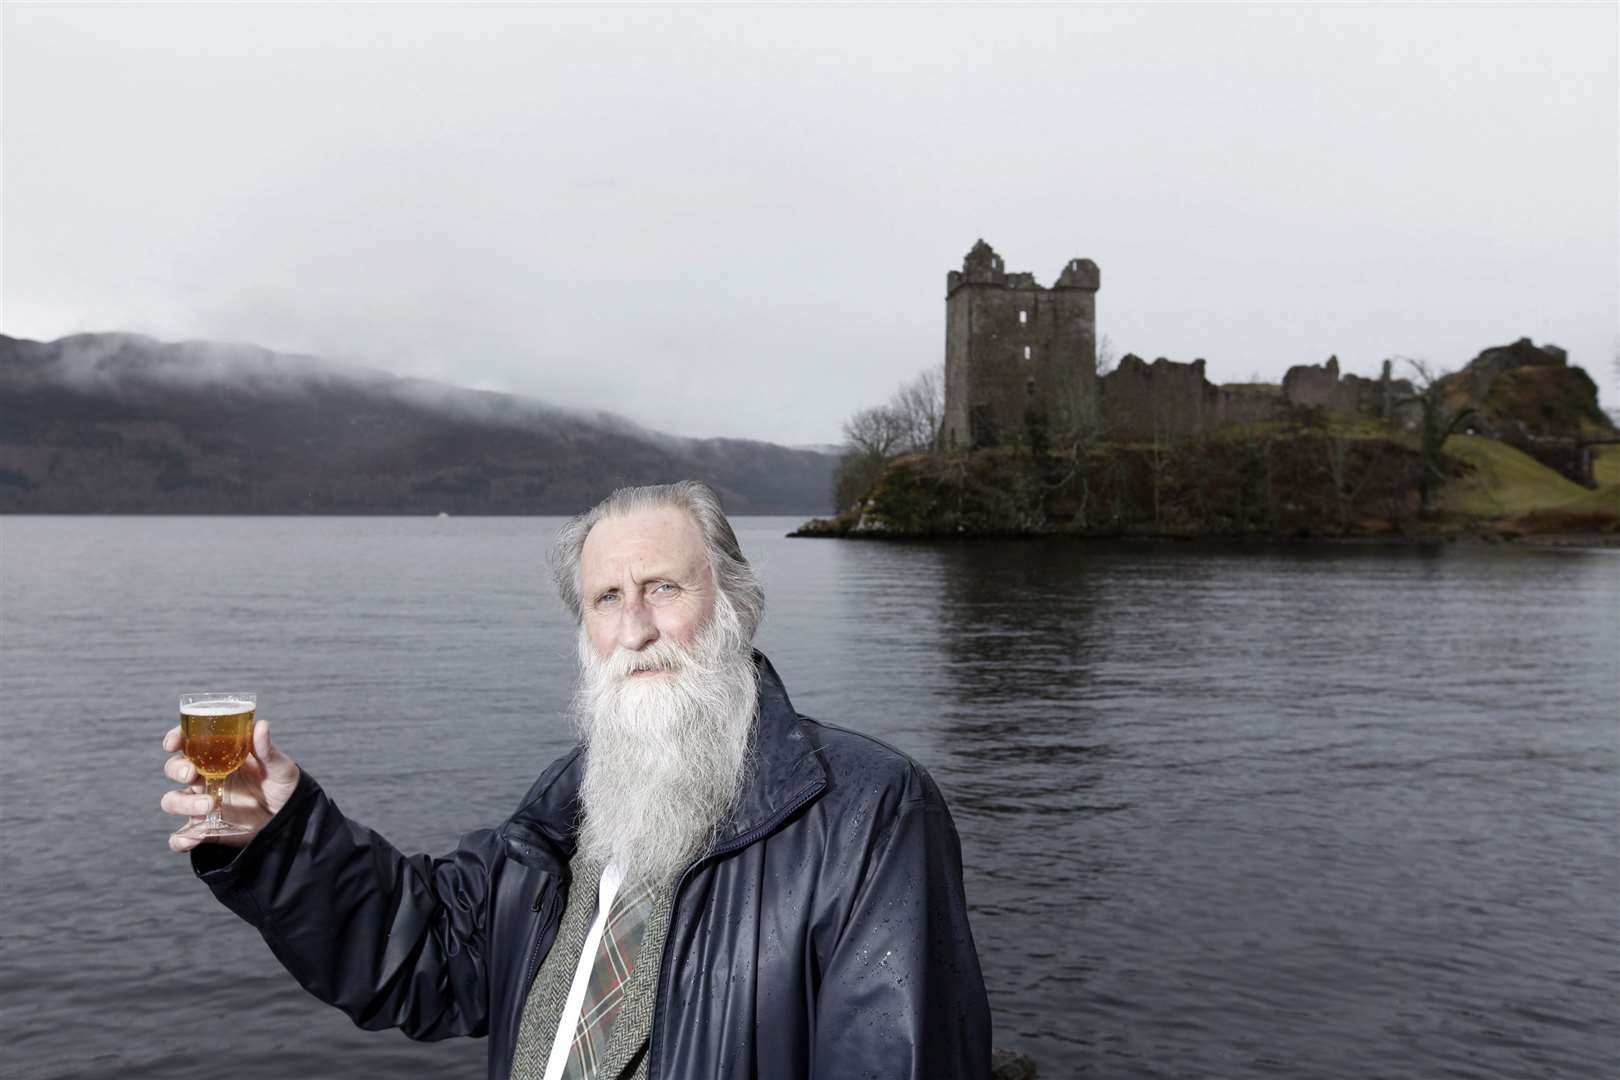 Adrian Shine has been part of the fascinating story of Loch Ness for decades.